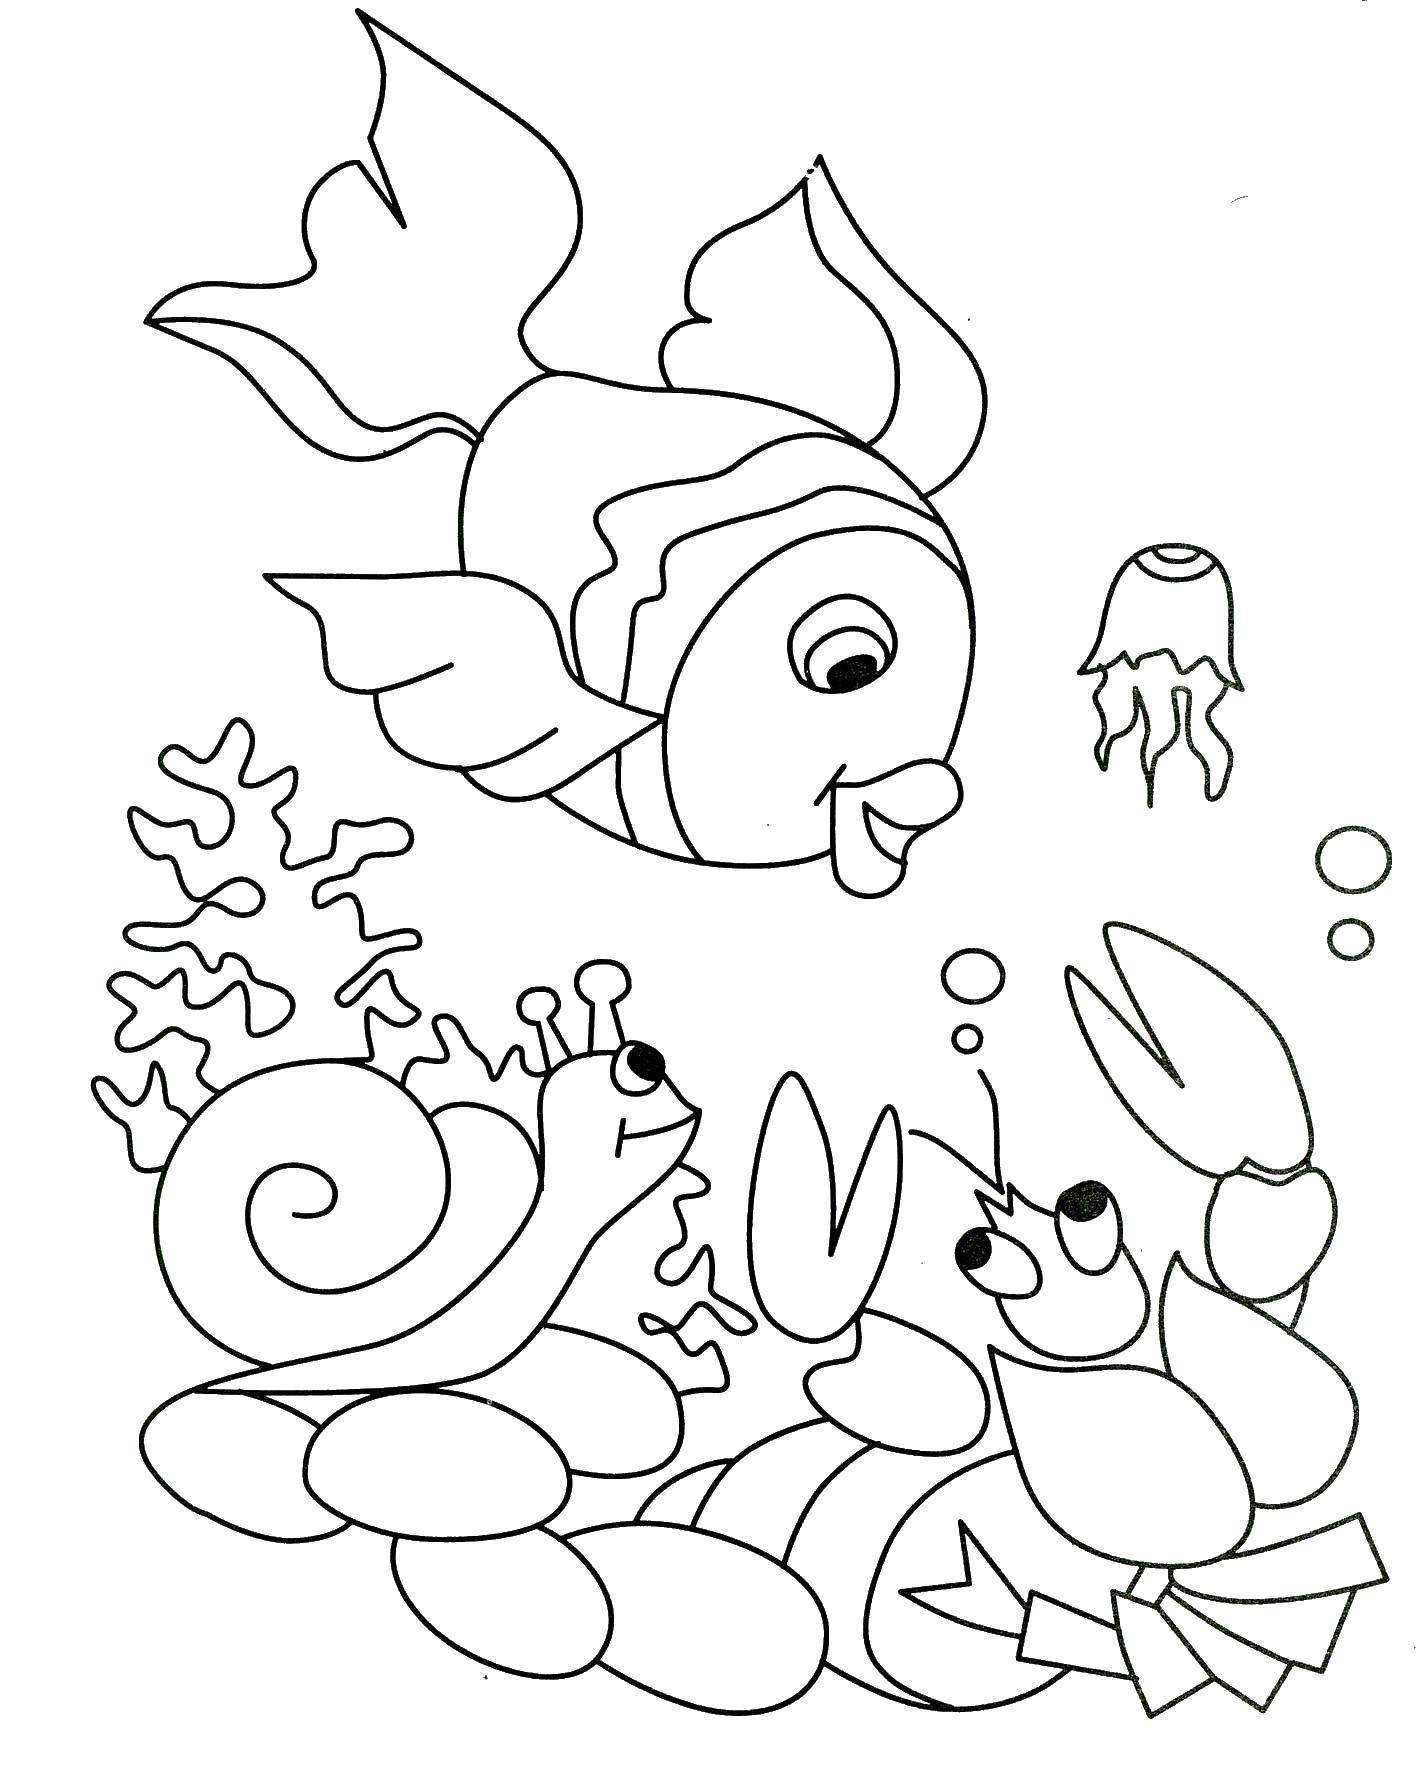 Coloring Fish, snail, crayfish and jellyfish in the water. Category marine. Tags:  Underwater world, fish, snail, crayfish.